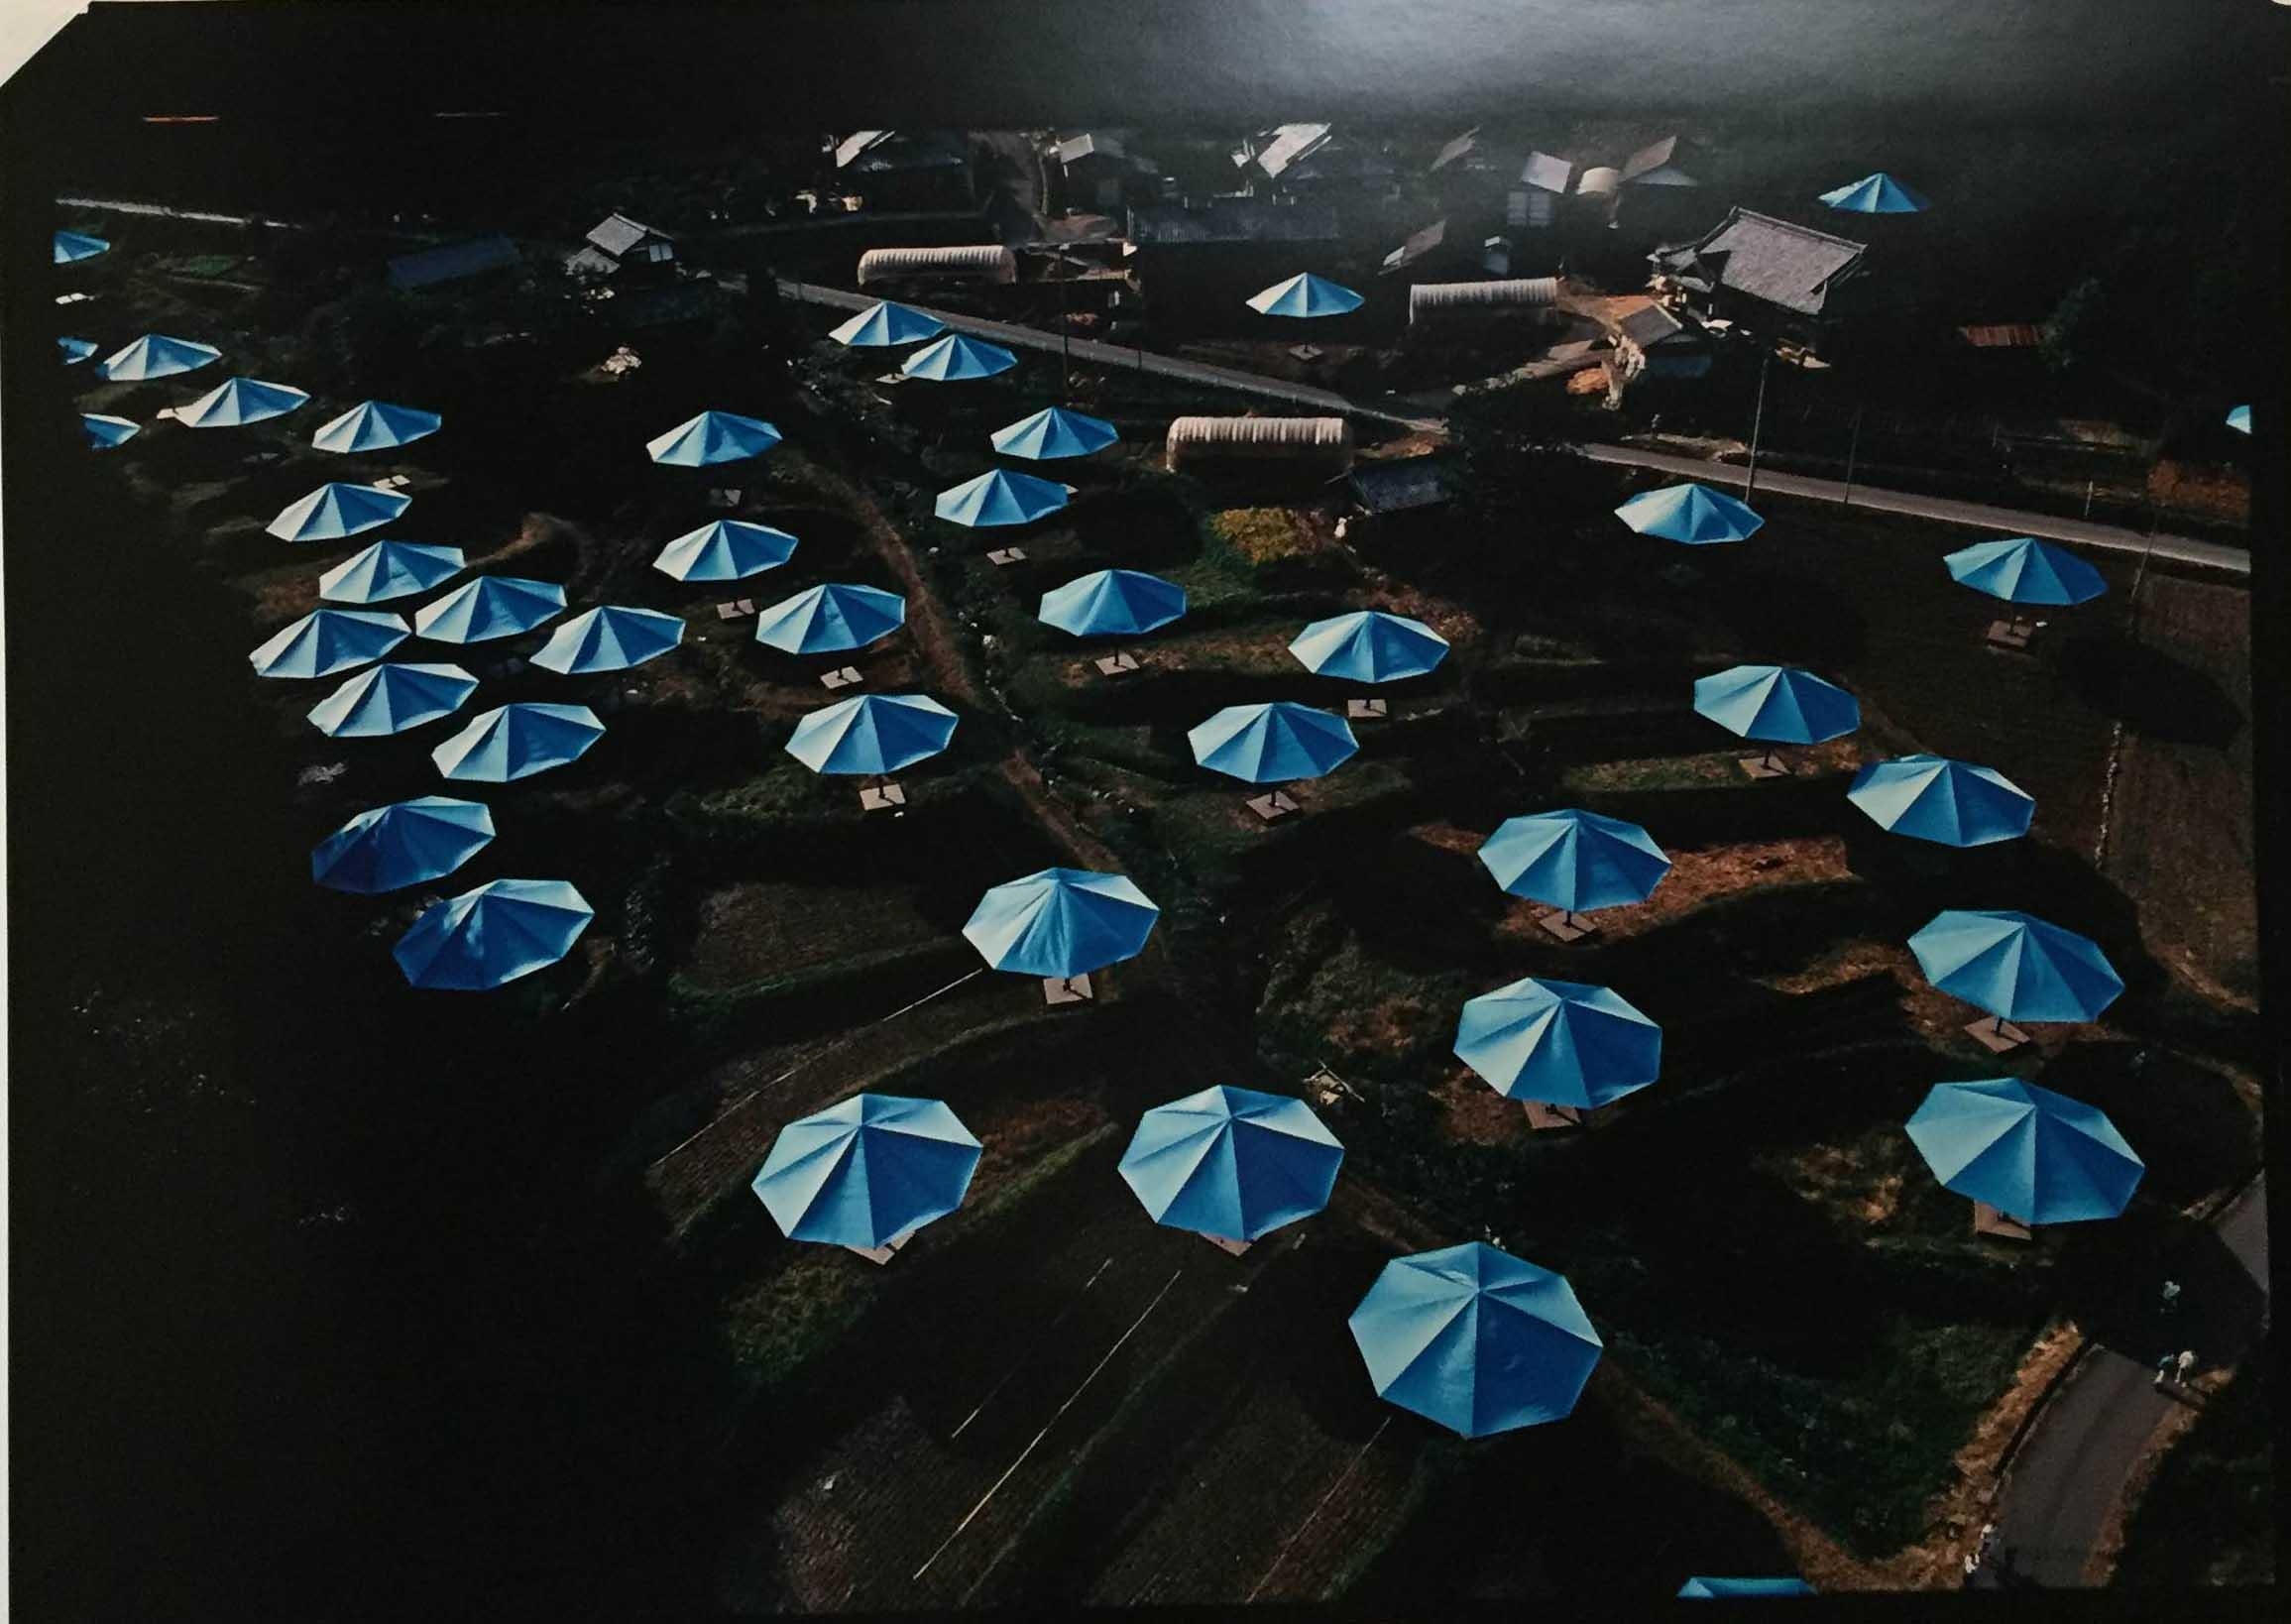 The Umbrellas by Wolfgang Volz, 1992